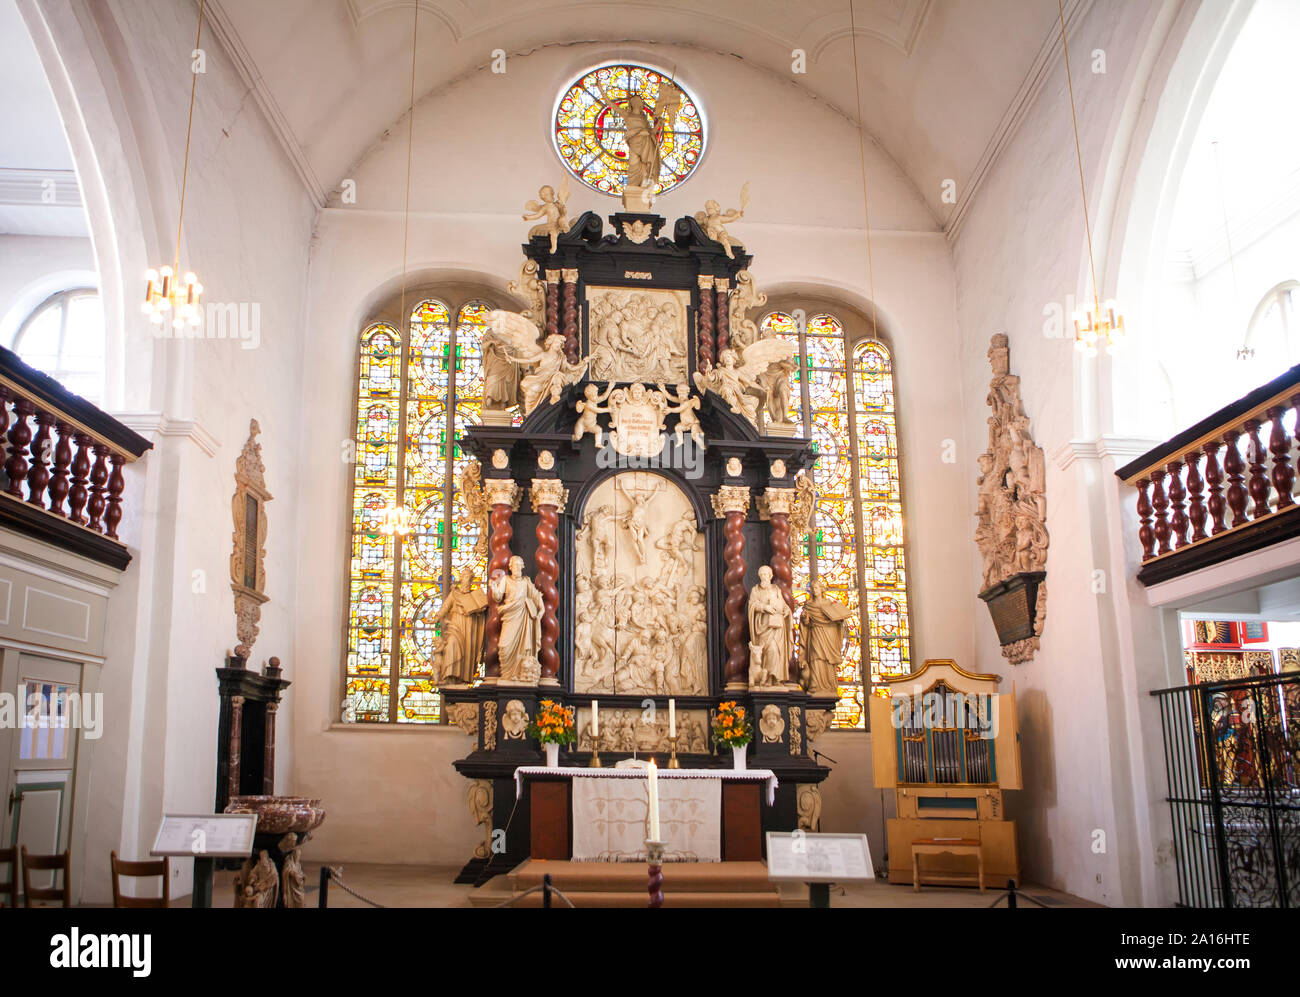 Baroque altar by Christian Precht, 1677,  St. Cosmae-Church, Stade, Lower Saxony, Germany, Europe Stock Photo